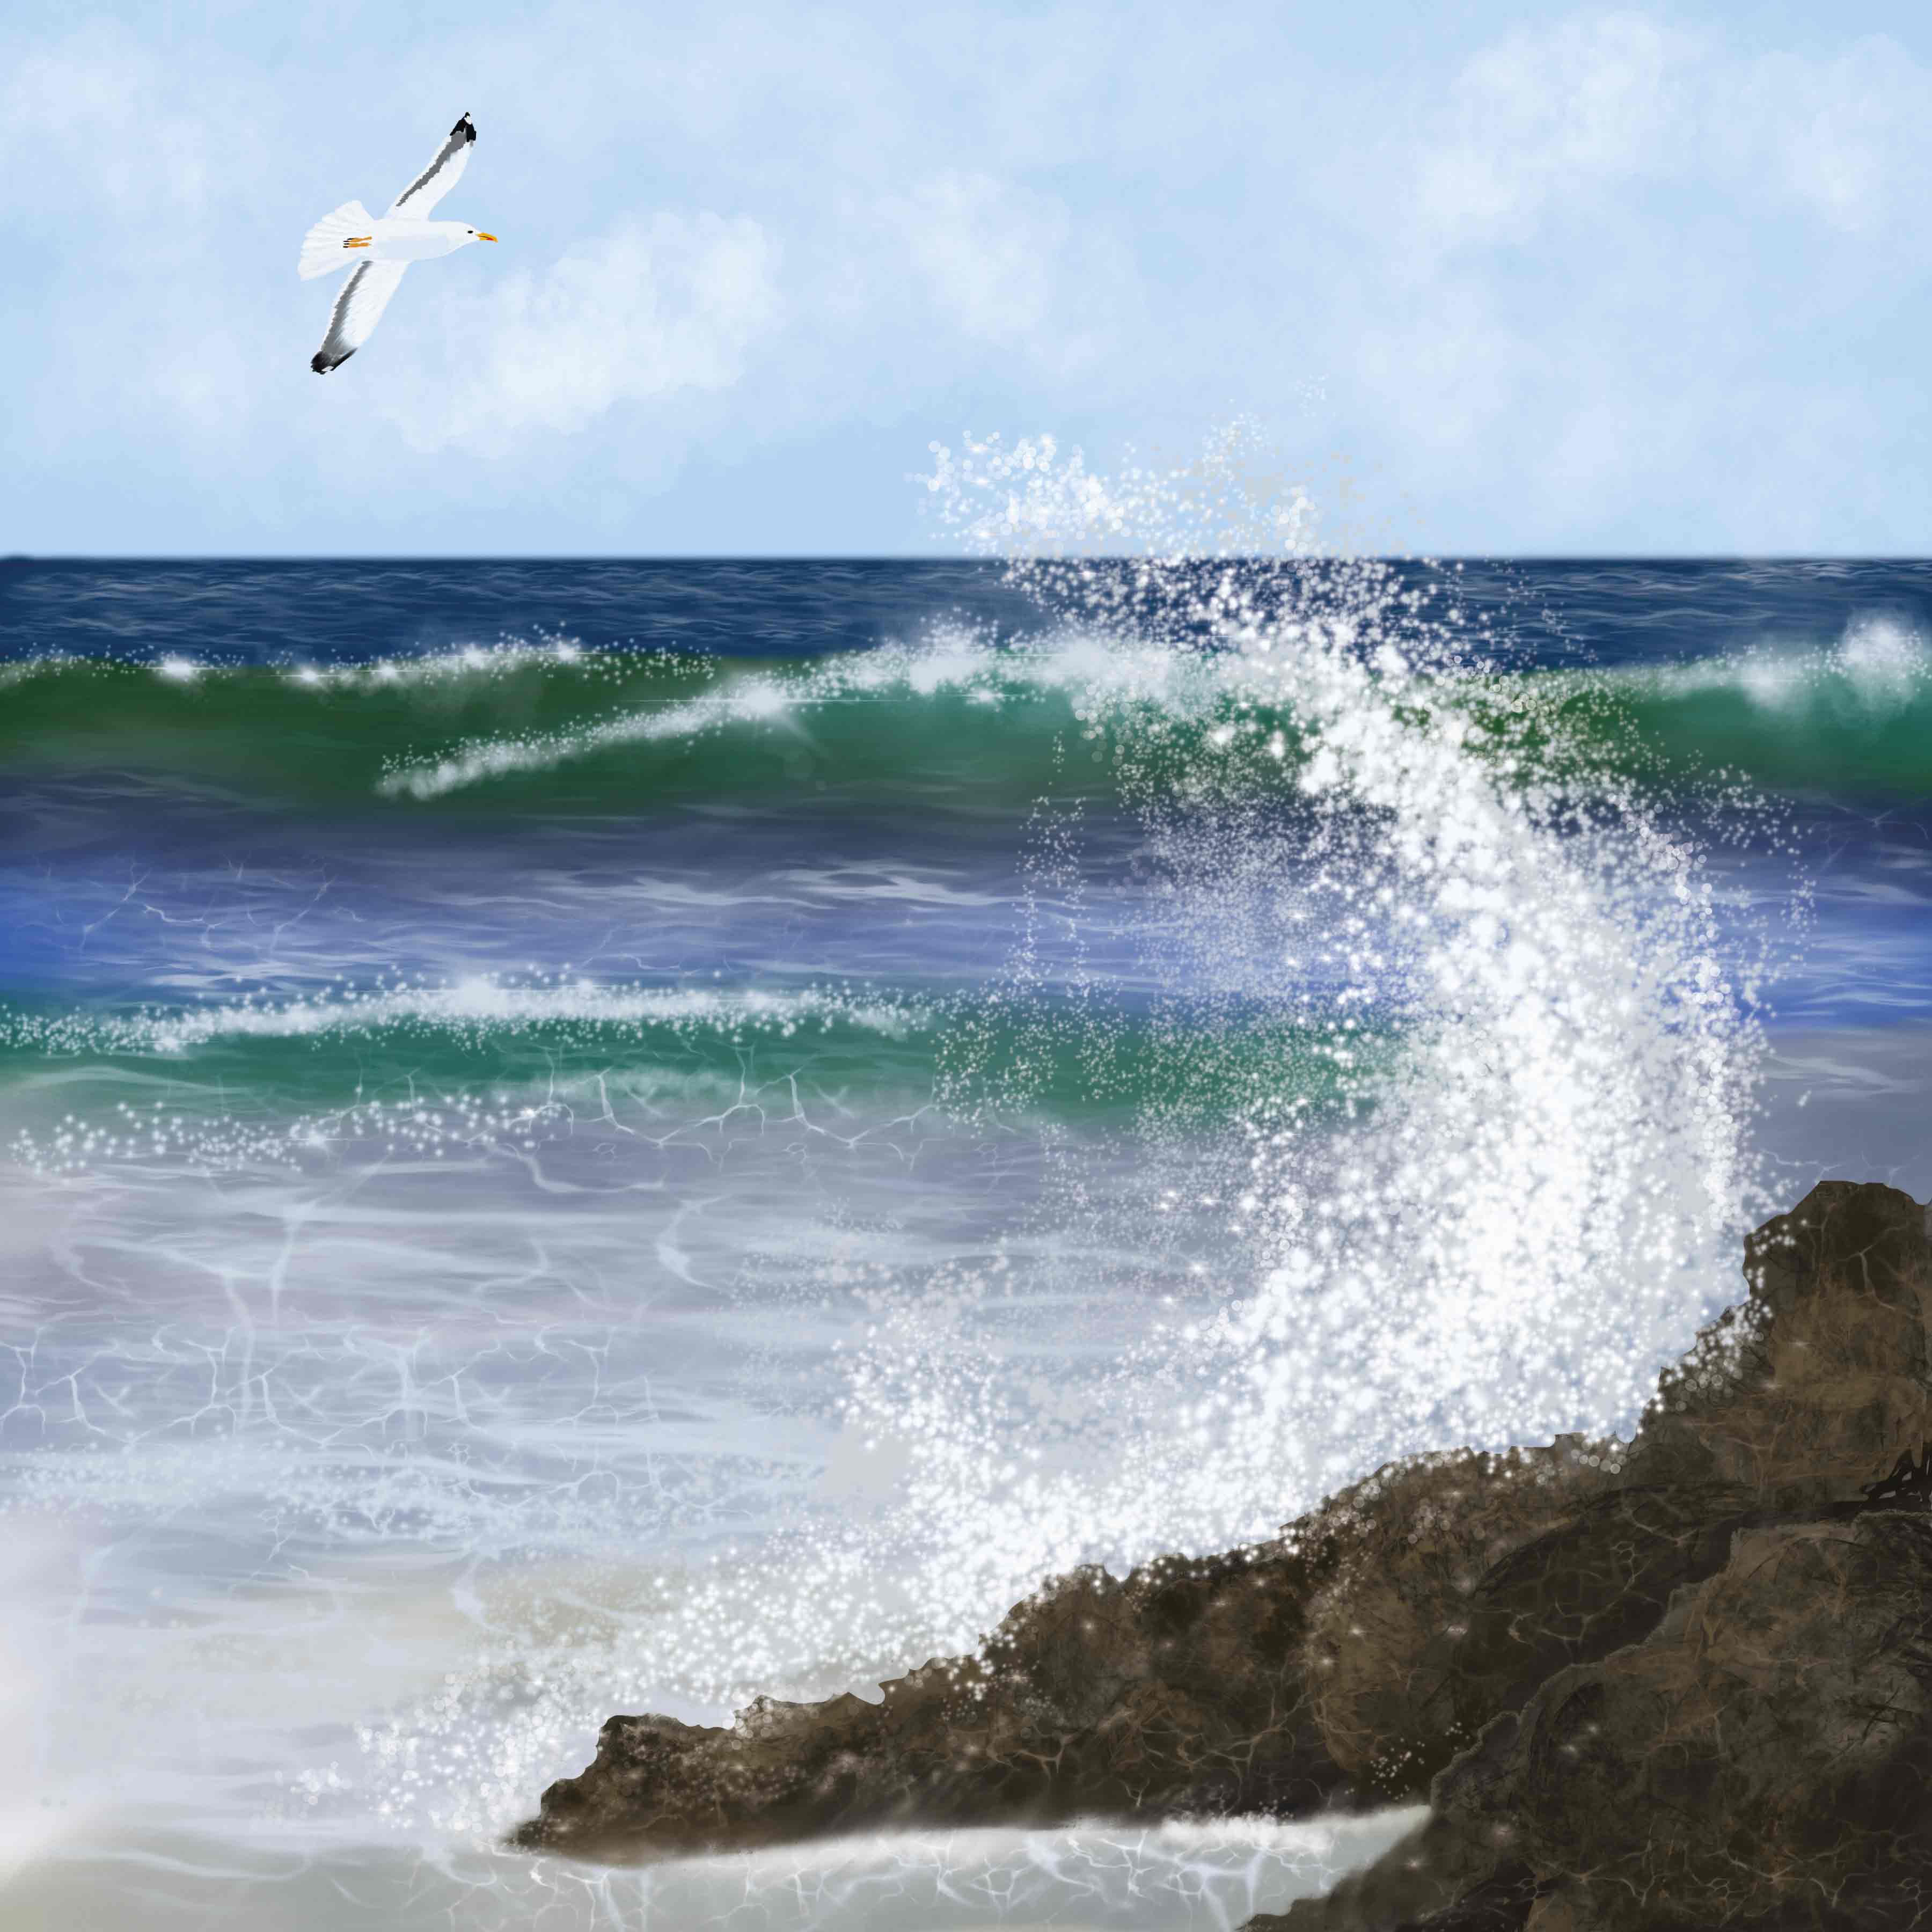 Art Greeting Card by Carla Vize-Martin, Out to Sea, Digital painting, Seagull and waves by the shore